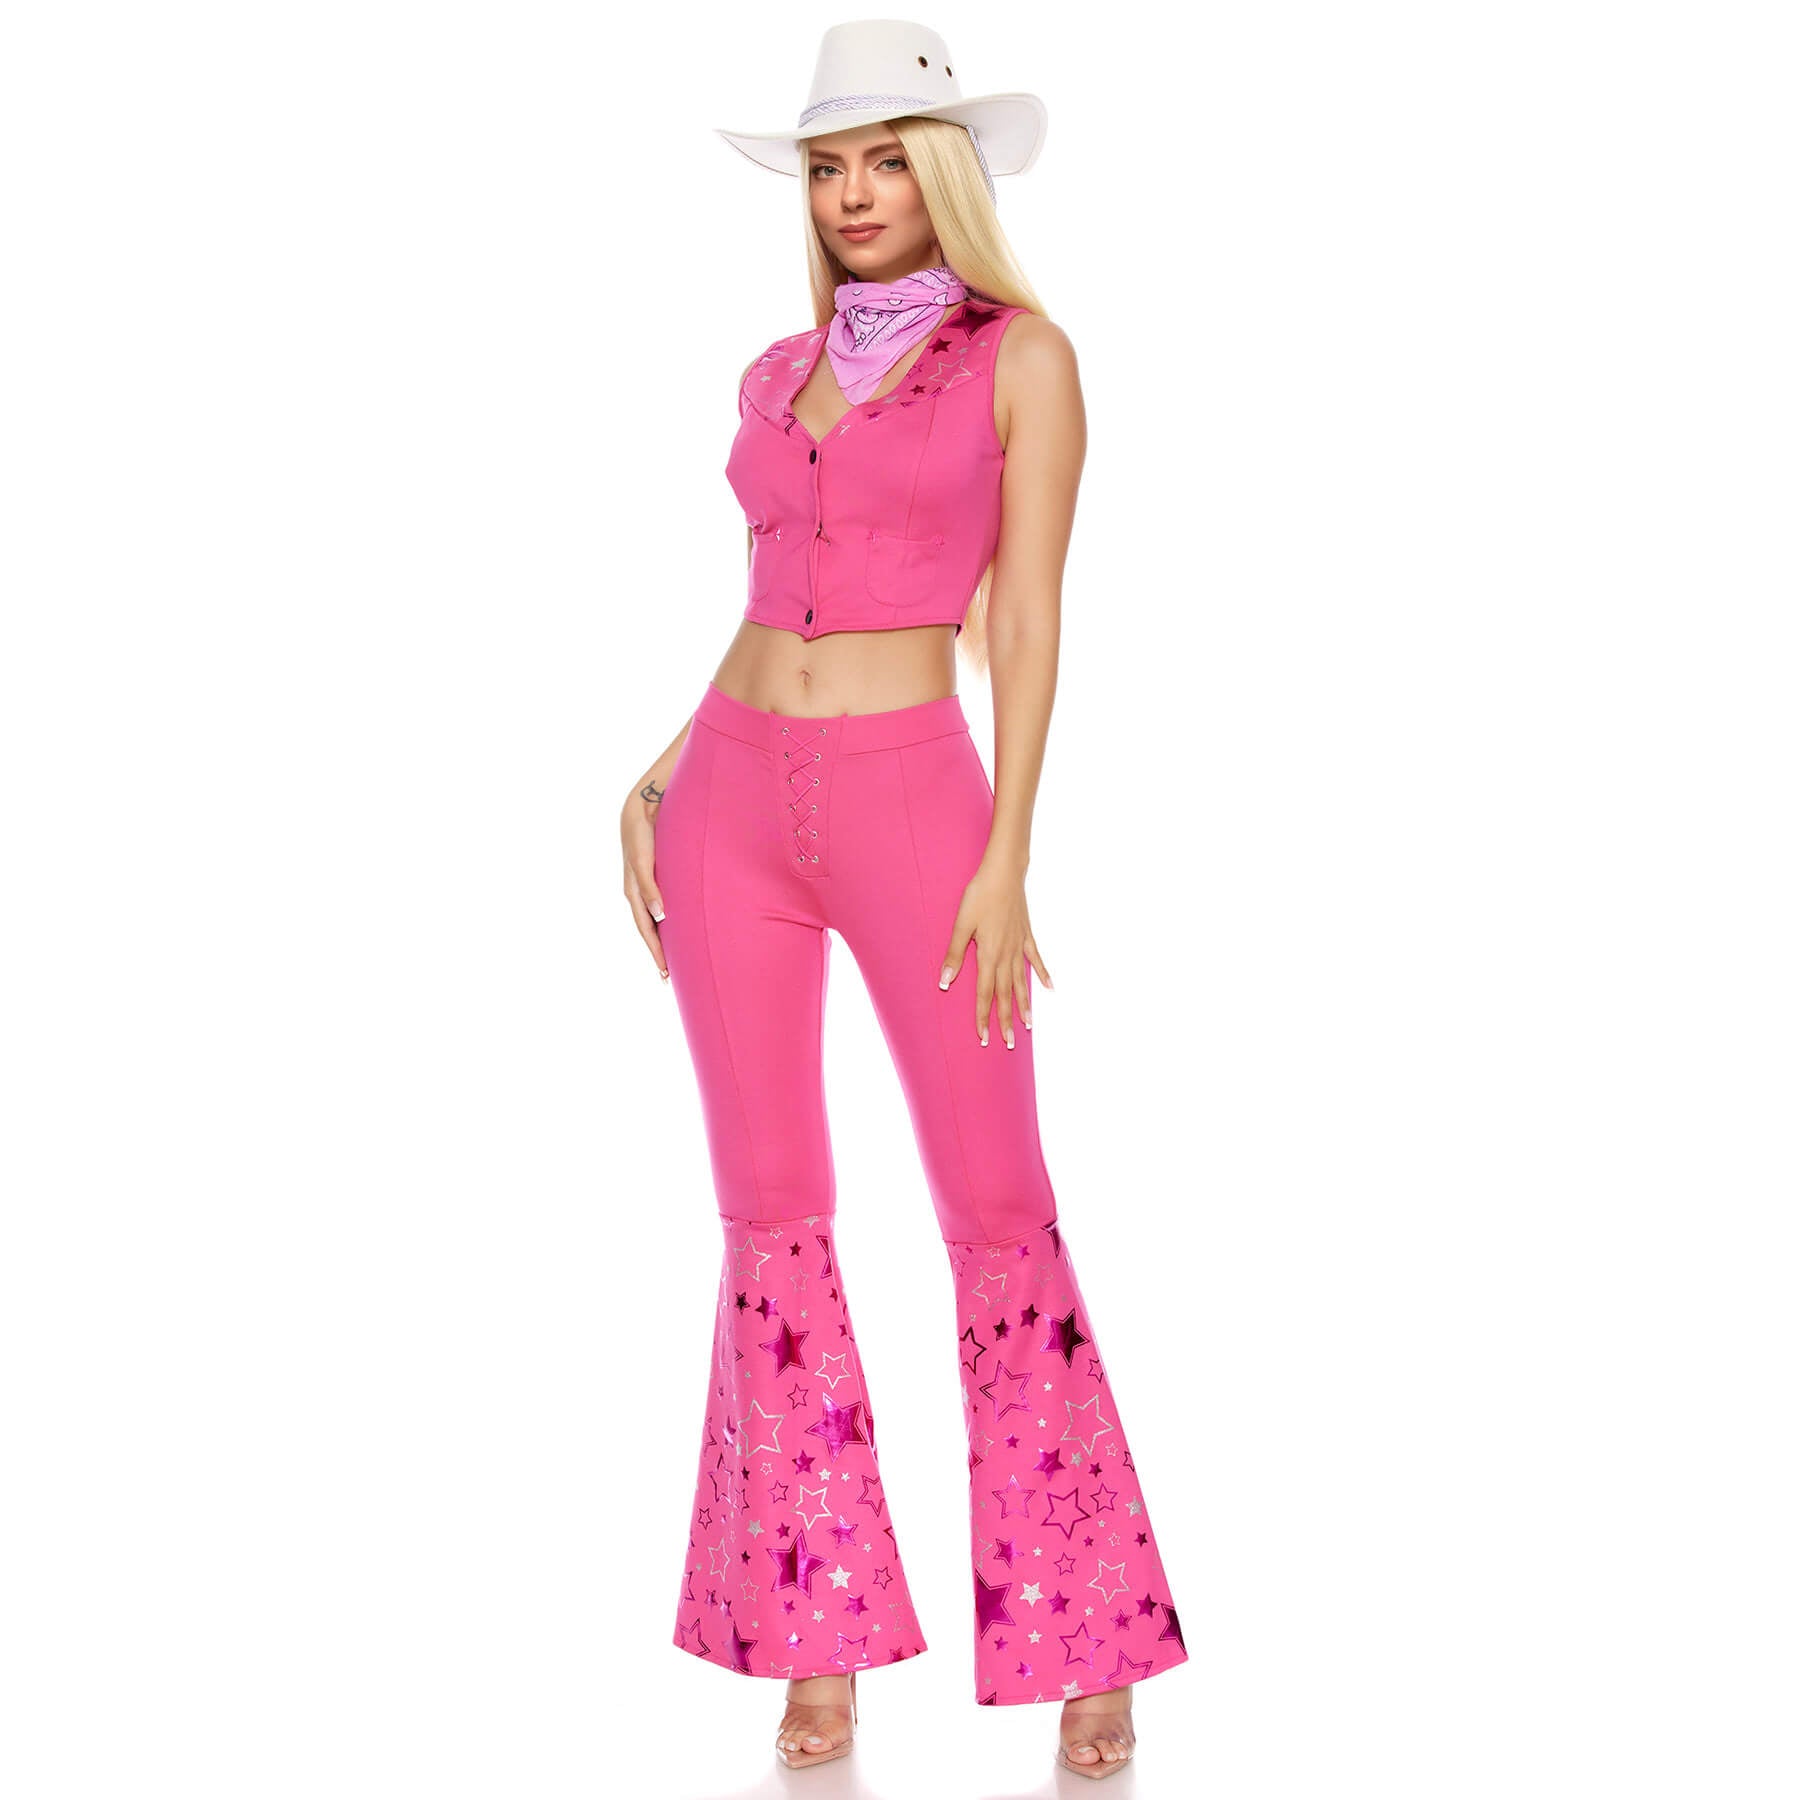 Couples Barbara Costume Cowgirl and Cowboy Outfits Women Men Western C –